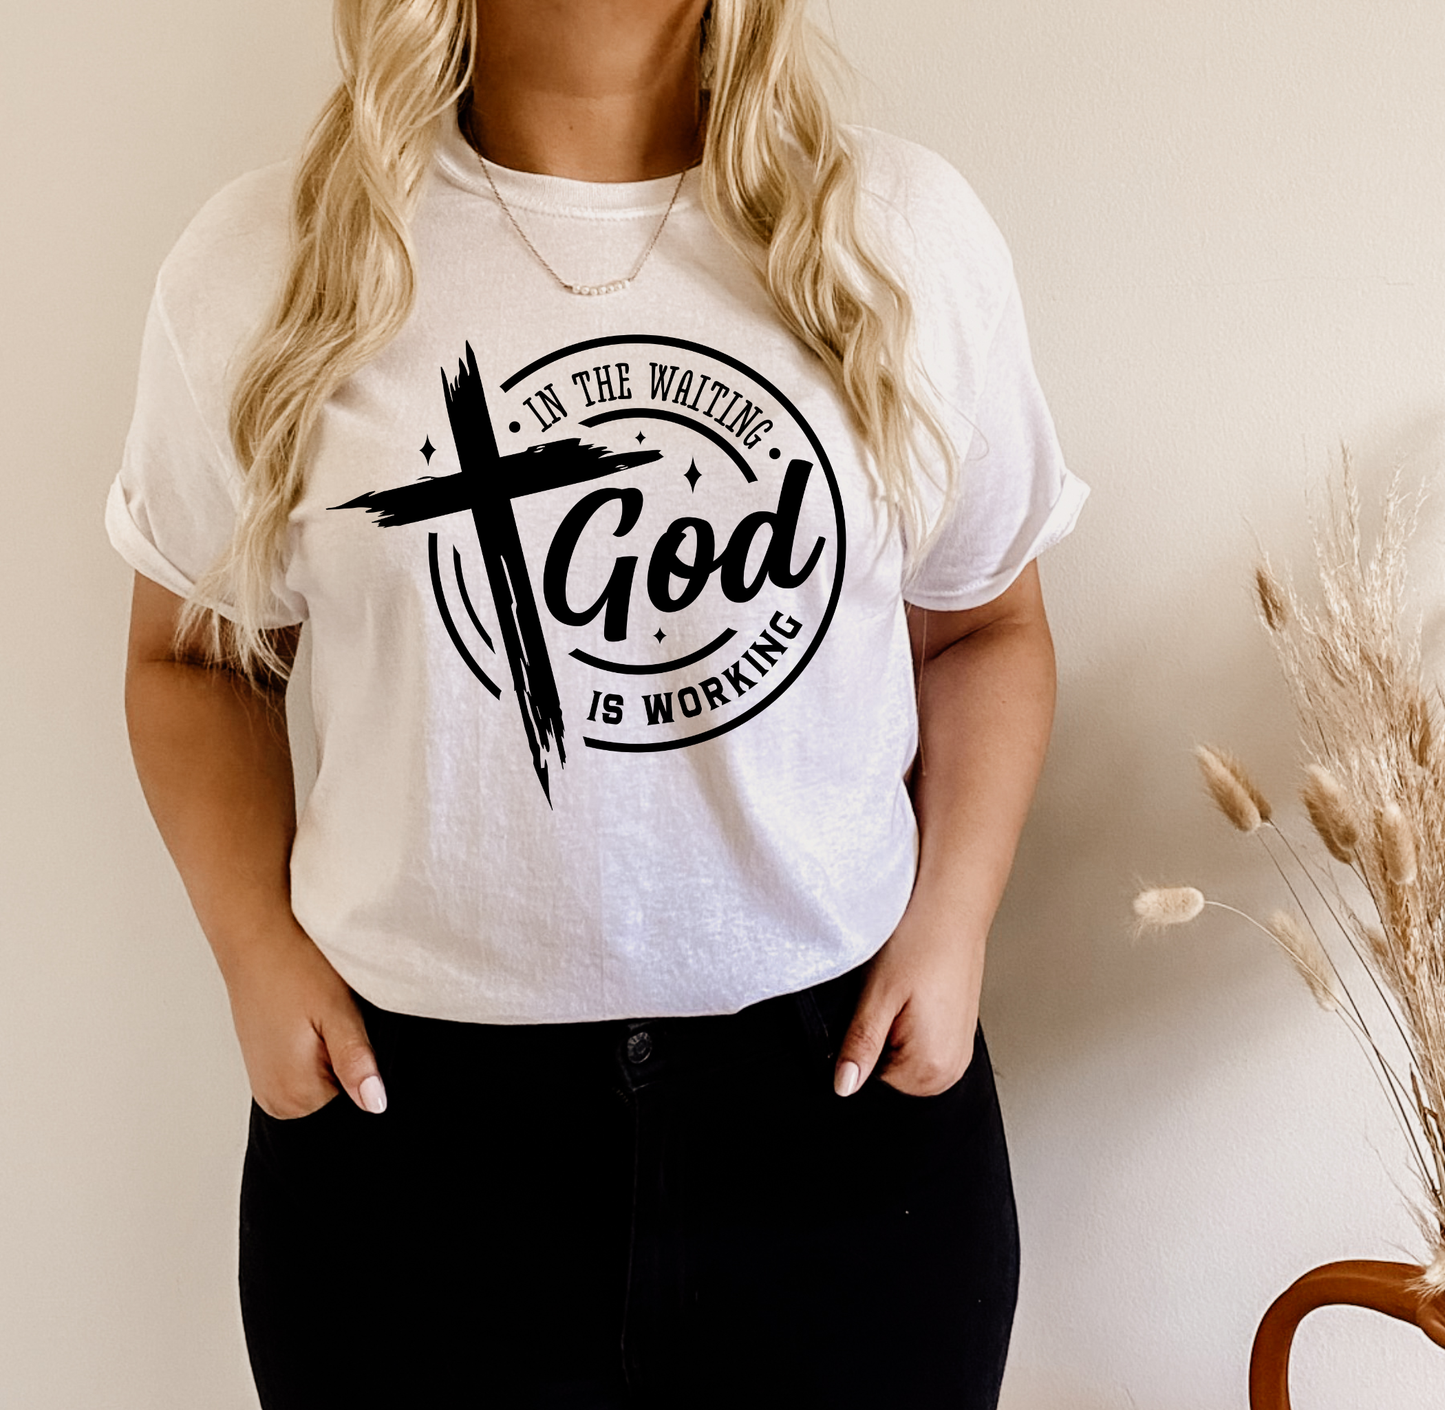 In the waiting God is working T-shirt